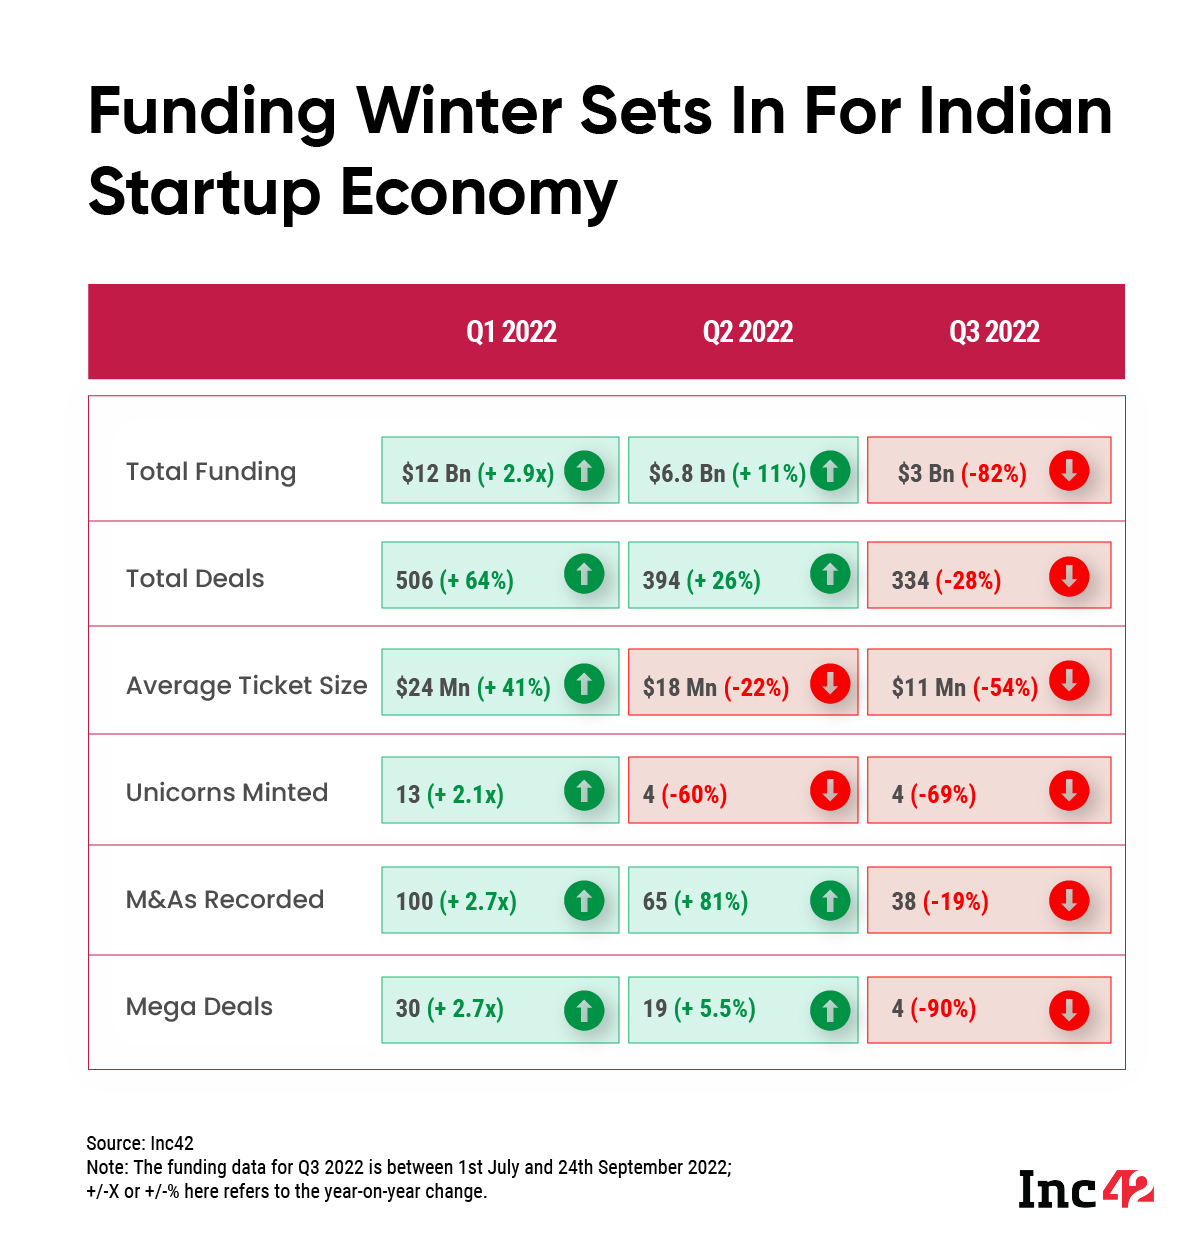 Funding Winter Sets In For Indian Startup Economy